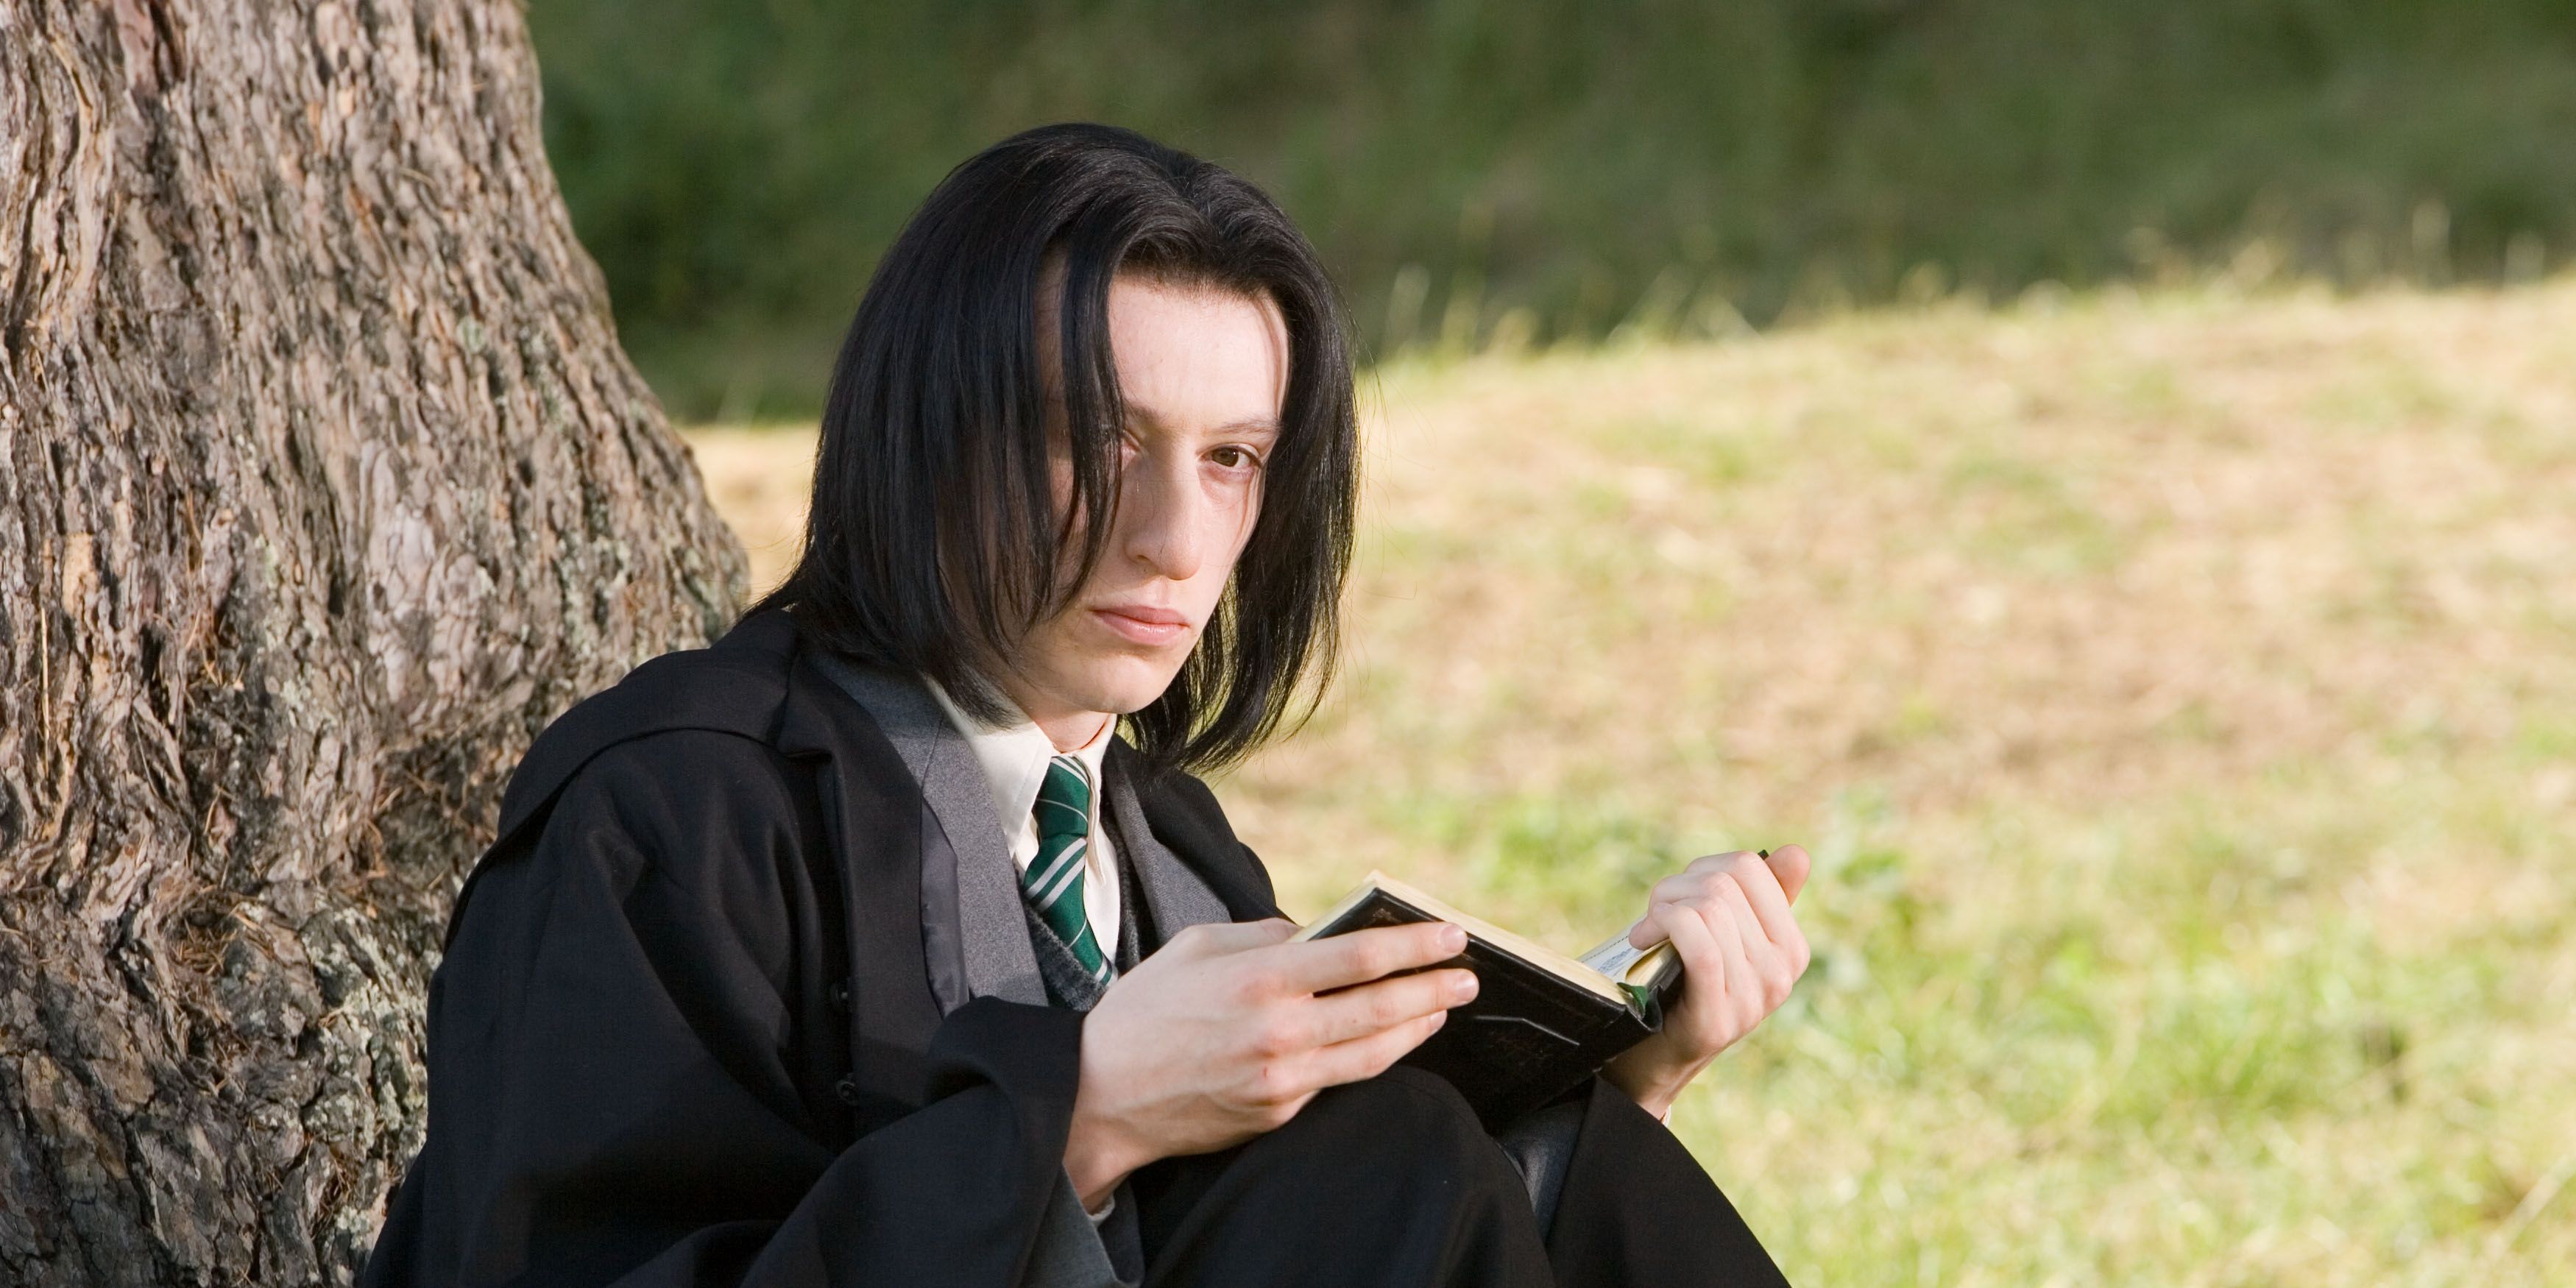 Harry Potter Why Fans Want A Snape Prequel Series